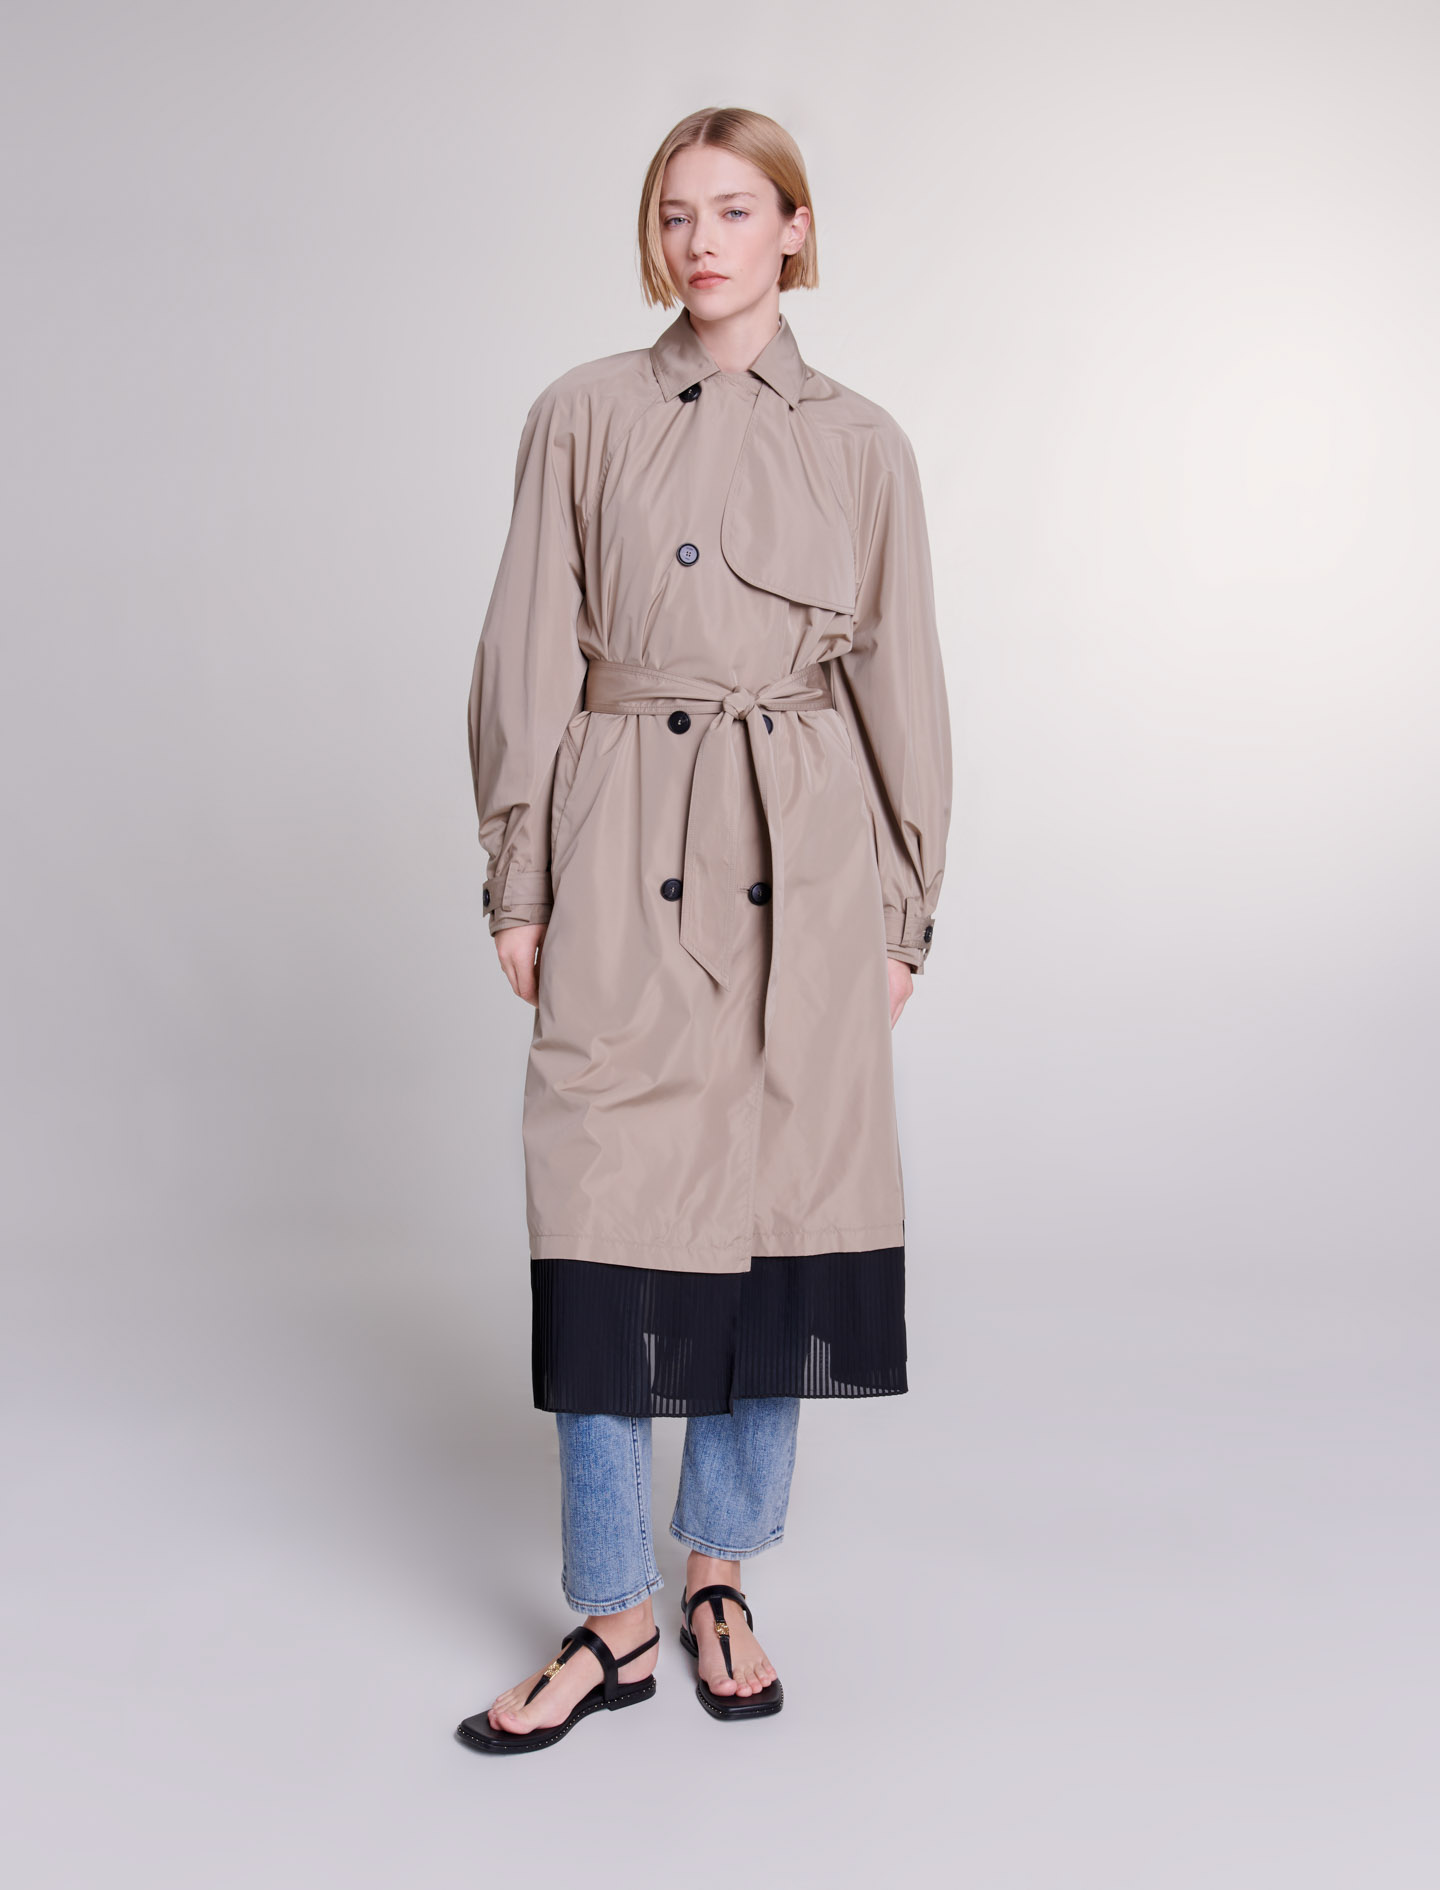 Maje Woman's polyester Lining: Contrast trench coat for Spring/Summer, in color Mole / Brown